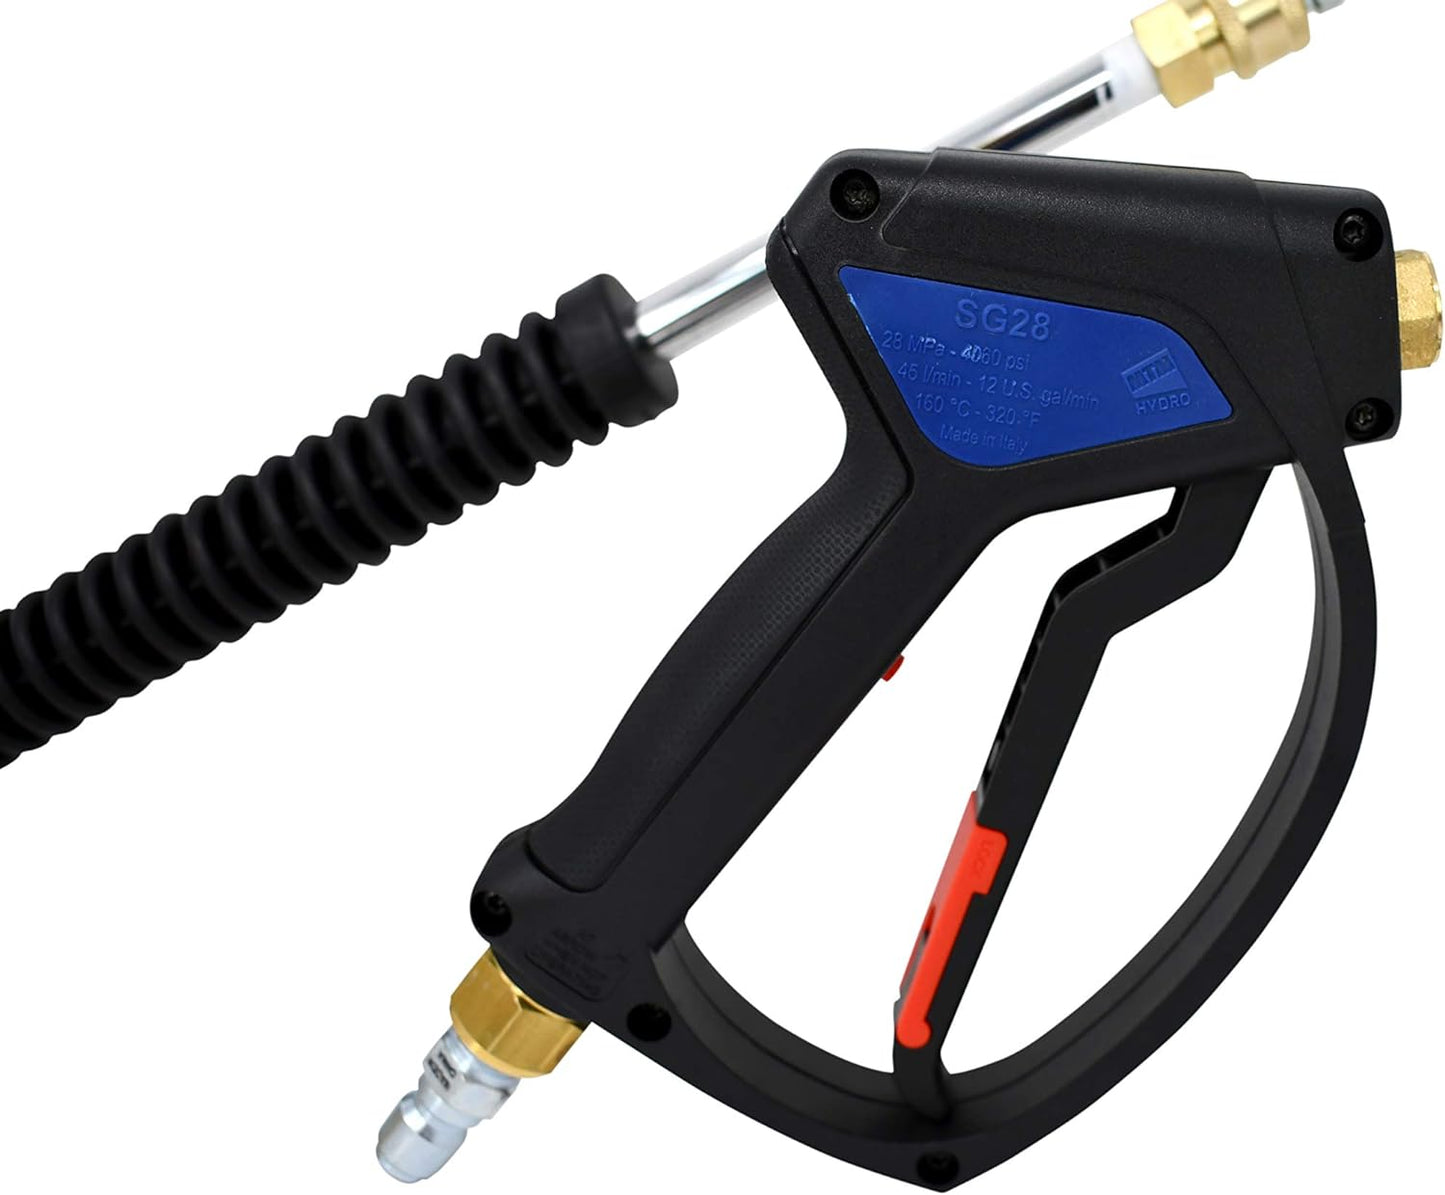 MTM Hydro Pressure Washer Spray Gun Kit Compatible with Most Power Washers and Foam Cannons - Upgraded SG28 Spray Gun, 18" Extension Wand, and Hardware Adaptors Best for Electric Pressure Washers